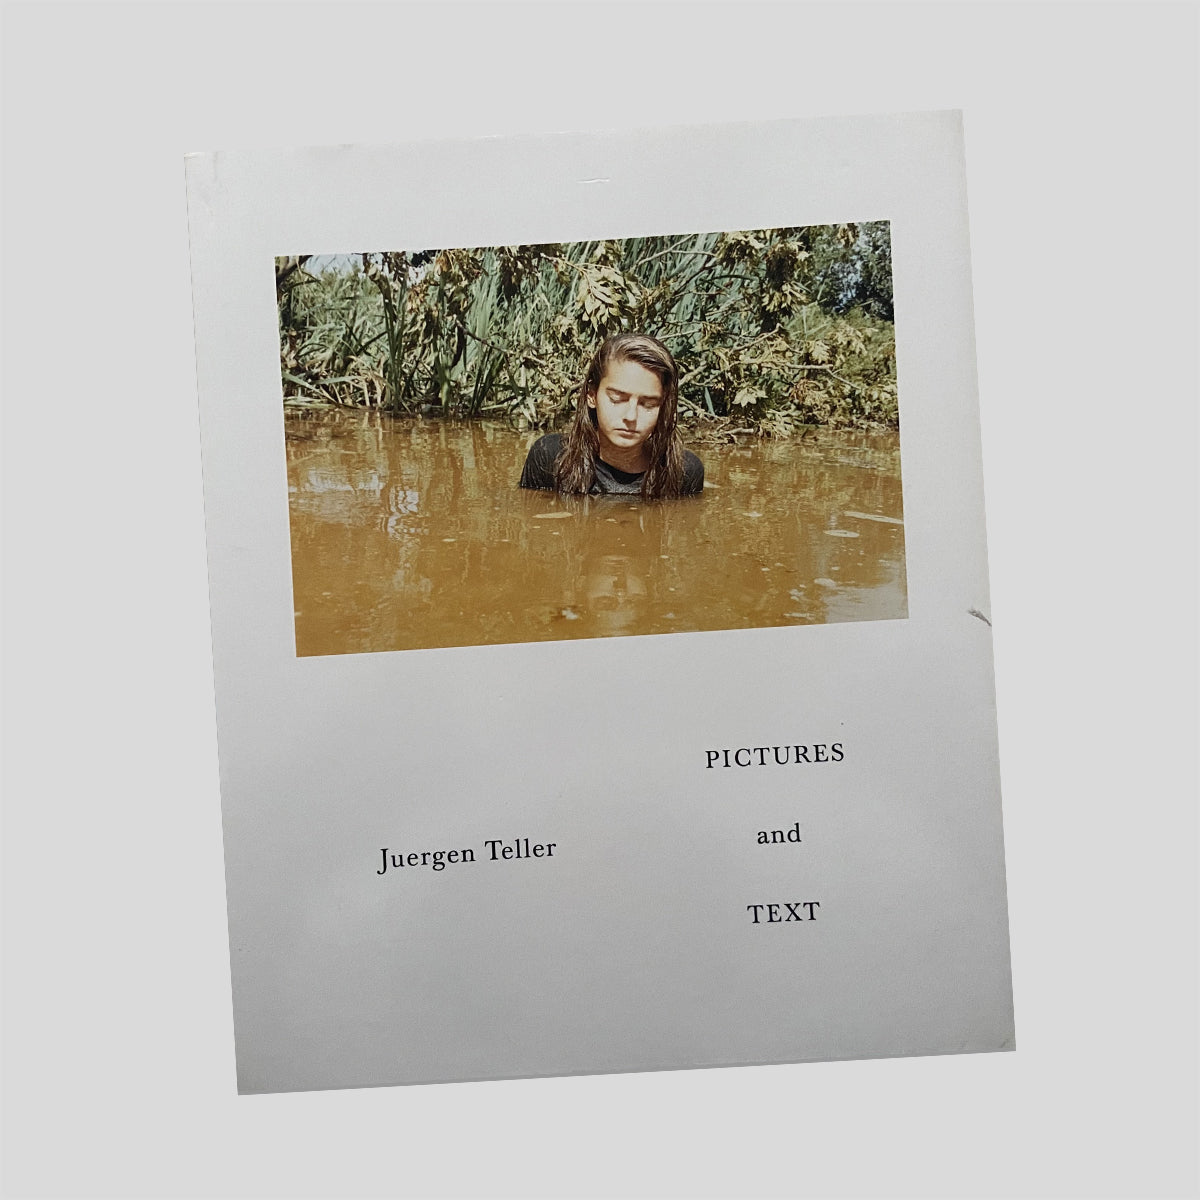 PICTURES and TEXT - Juergen Teller